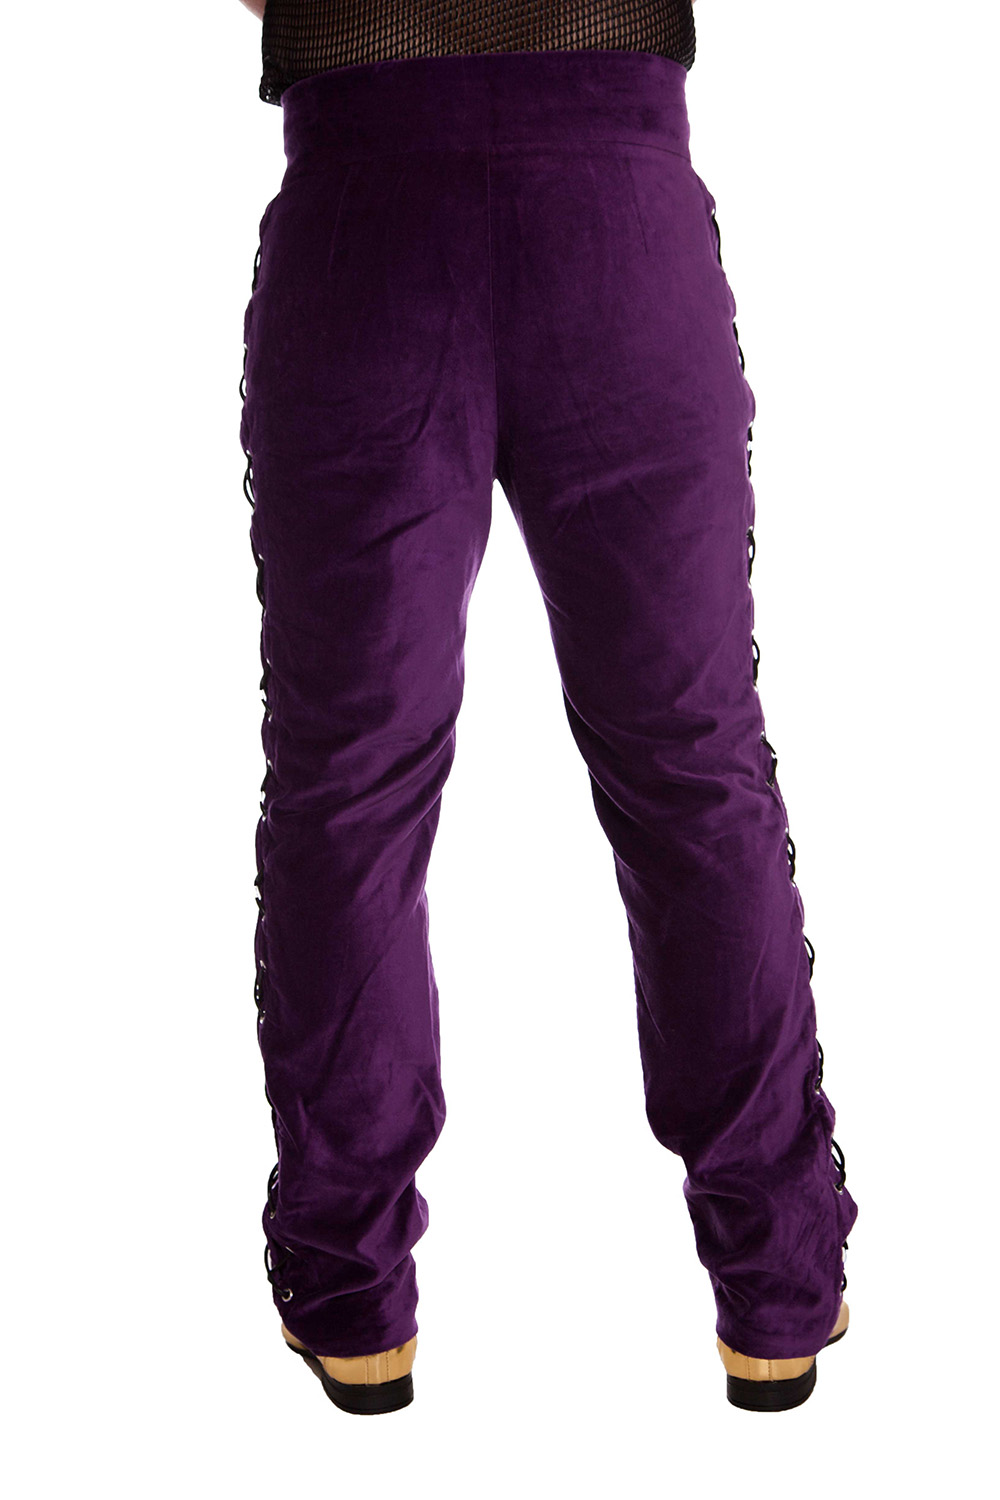 PURPLE VELVET PANTS WITH LACING DOWN THE SIDE SEAMS ⋆ House of Avida